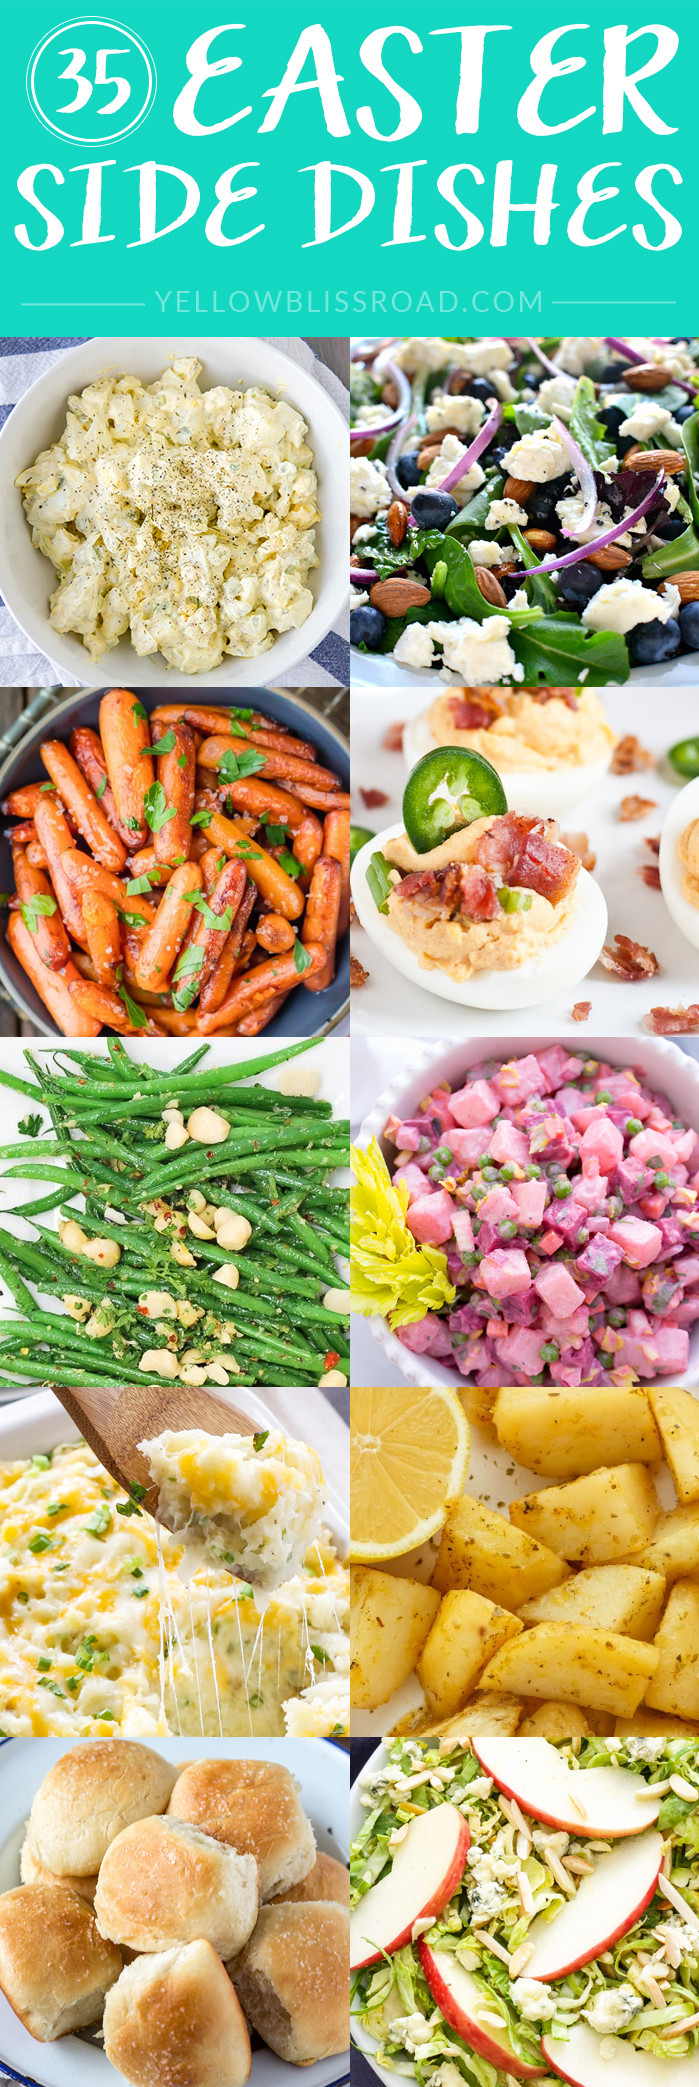 Sides For Easter Dinner
 Easter Side Dishes More than 50 of the Best Sides for